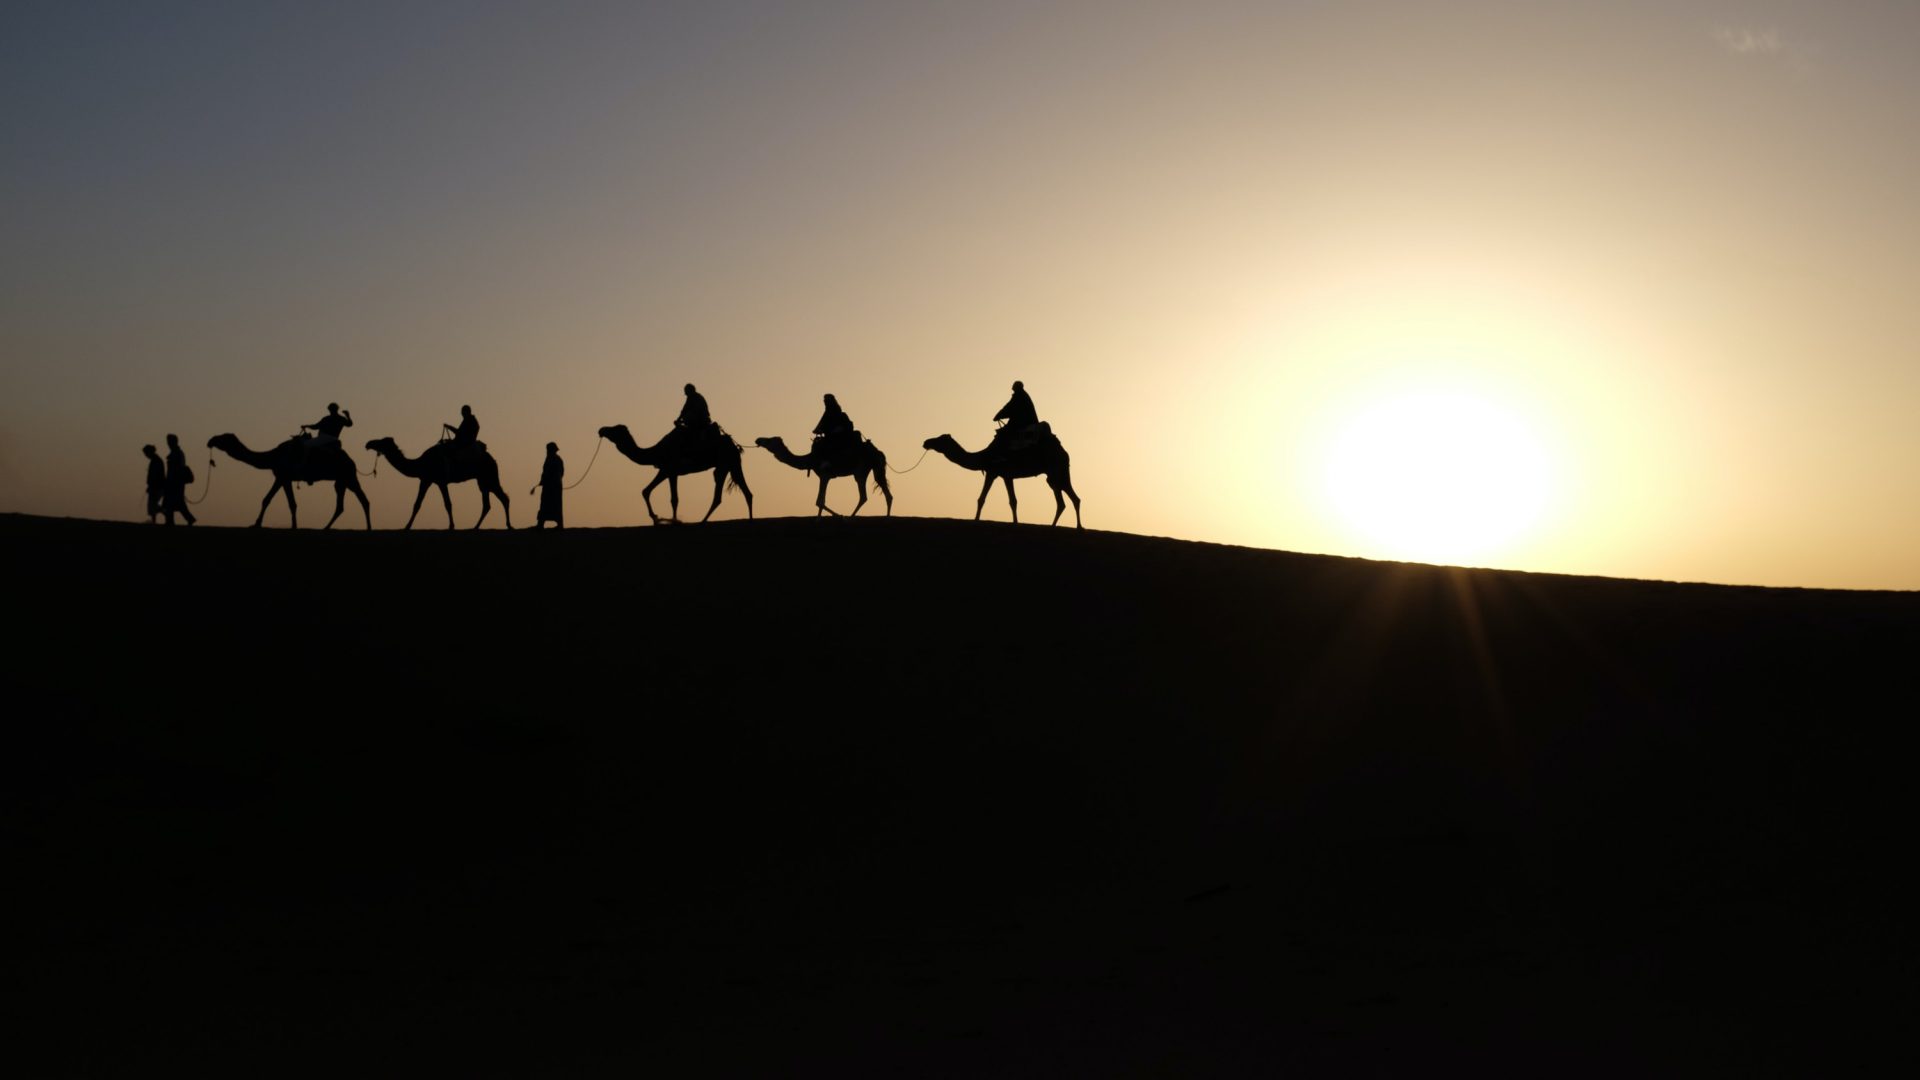 Silhouettes of camels walking through the desert.